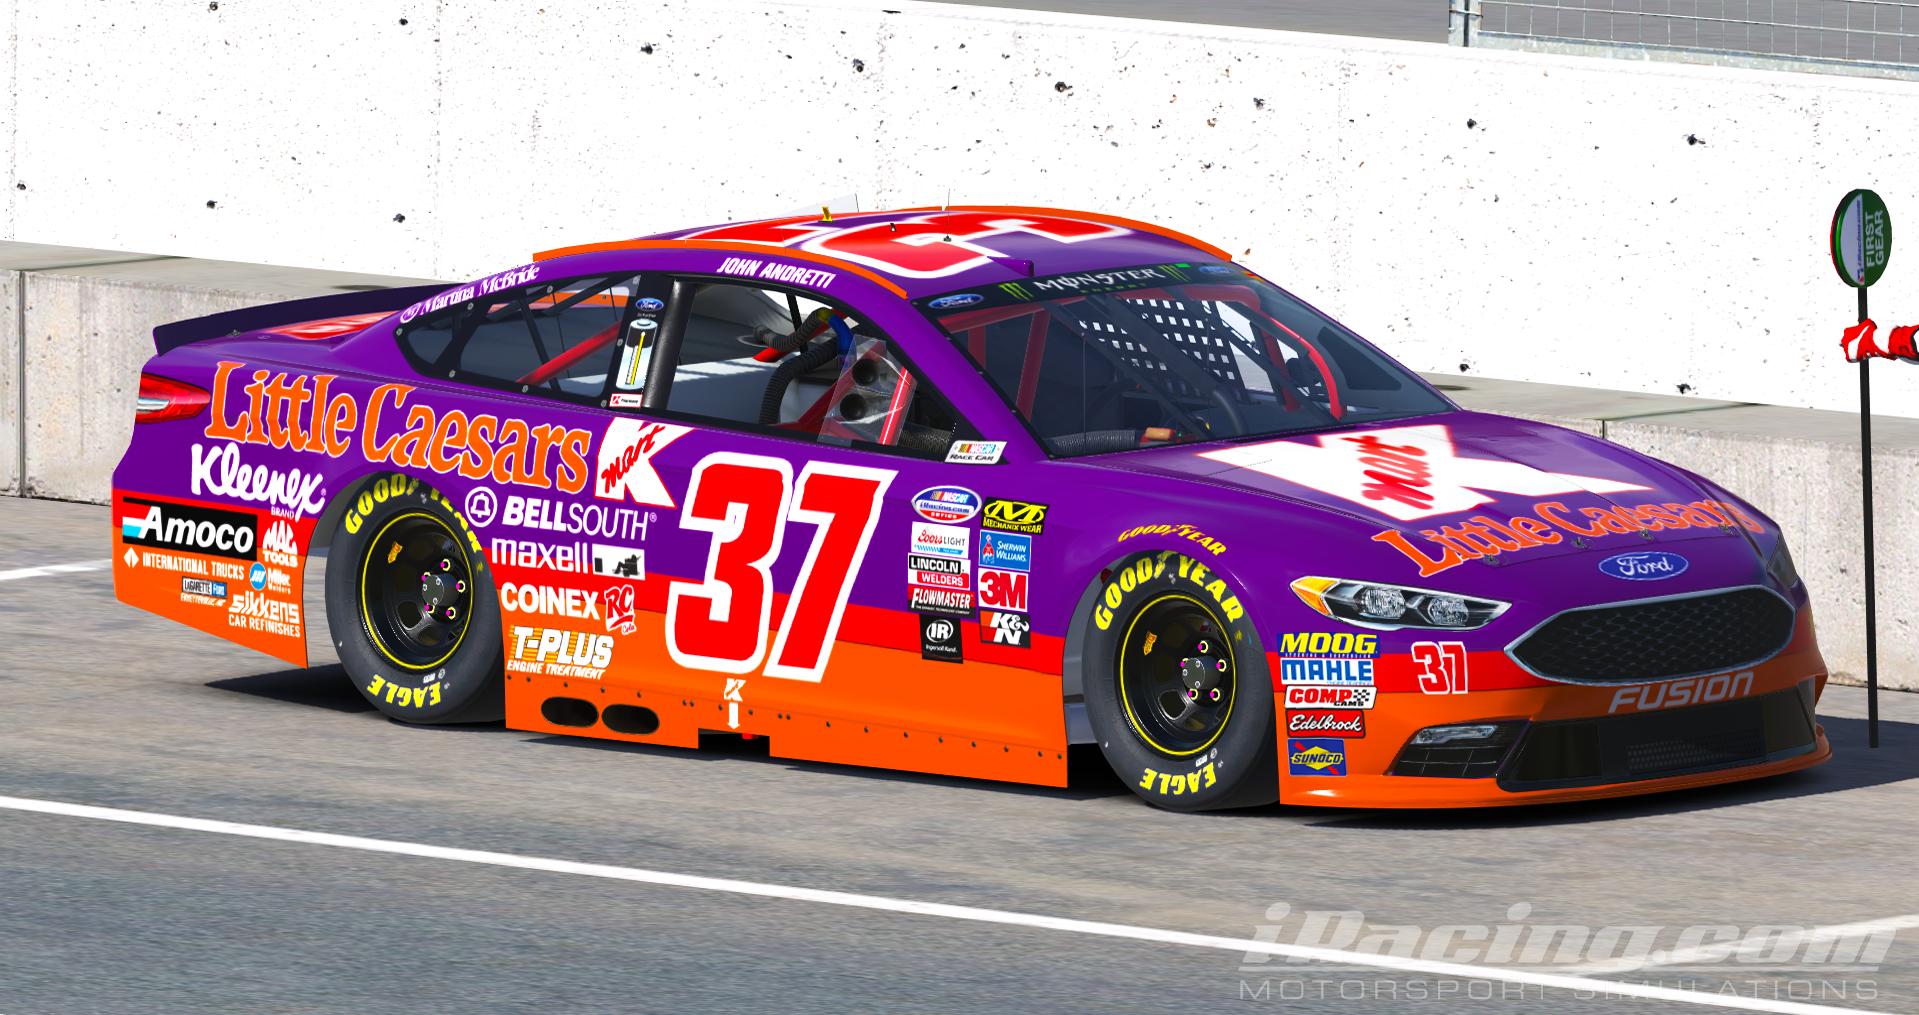 Preview of 1995 John Andretti Little Caesars Kmart Fusion by Ryan A Williams